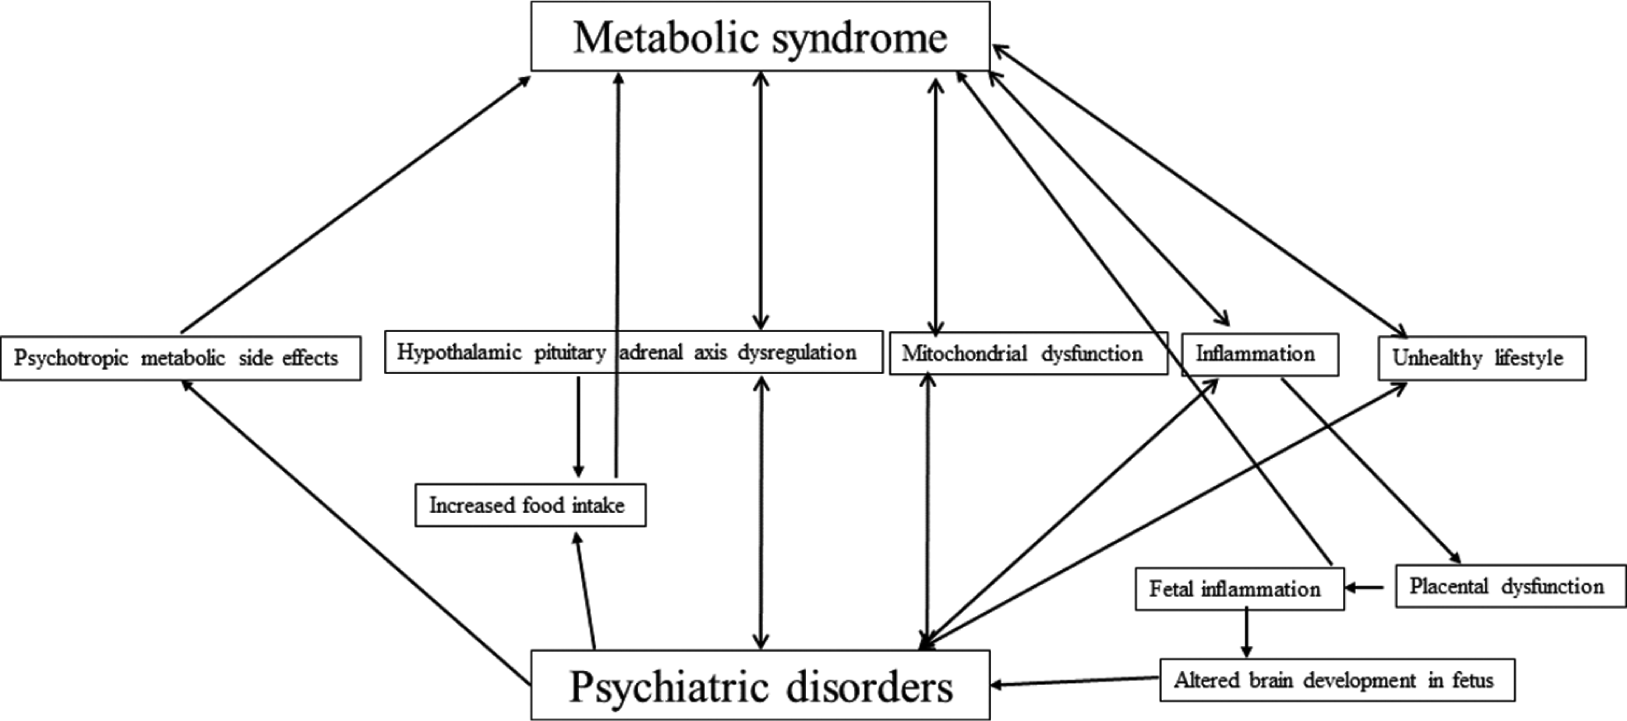 Common mechanisms and bidirectional relationship between metabolic syndrome and psychiatric disorders.